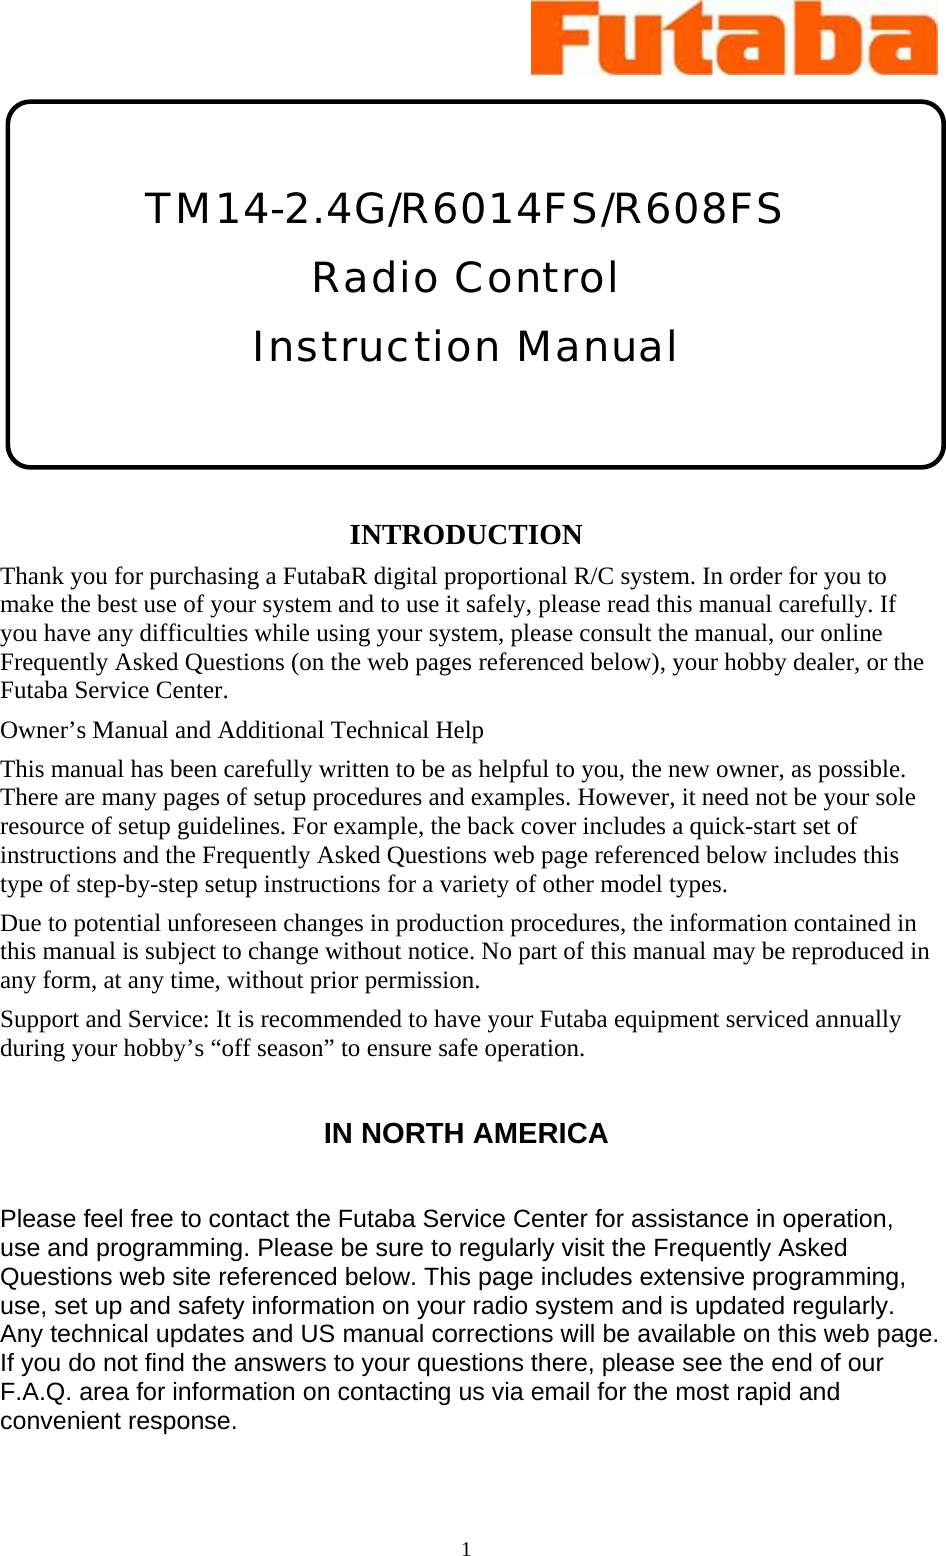 1      TM14-2.4G/R6014FS/R608FS Radio Control  Instruction Manual    INTRODUCTION Thank you for purchasing a FutabaR digital proportional R/C system. In order for you to make the best use of your system and to use it safely, please read this manual carefully. If you have any difficulties while using your system, please consult the manual, our online Frequently Asked Questions (on the web pages referenced below), your hobby dealer, or the Futaba Service Center. Owner’s Manual and Additional Technical Help This manual has been carefully written to be as helpful to you, the new owner, as possible. There are many pages of setup procedures and examples. However, it need not be your sole resource of setup guidelines. For example, the back cover includes a quick-start set of instructions and the Frequently Asked Questions web page referenced below includes this type of step-by-step setup instructions for a variety of other model types. Due to potential unforeseen changes in production procedures, the information contained in this manual is subject to change without notice. No part of this manual may be reproduced in any form, at any time, without prior permission. Support and Service: It is recommended to have your Futaba equipment serviced annually during your hobby’s “off season” to ensure safe operation.  IN NORTH AMERICA  Please feel free to contact the Futaba Service Center for assistance in operation, use and programming. Please be sure to regularly visit the Frequently Asked Questions web site referenced below. This page includes extensive programming, use, set up and safety information on your radio system and is updated regularly. Any technical updates and US manual corrections will be available on this web page. If you do not find the answers to your questions there, please see the end of our F.A.Q. area for information on contacting us via email for the most rapid and convenient response.  